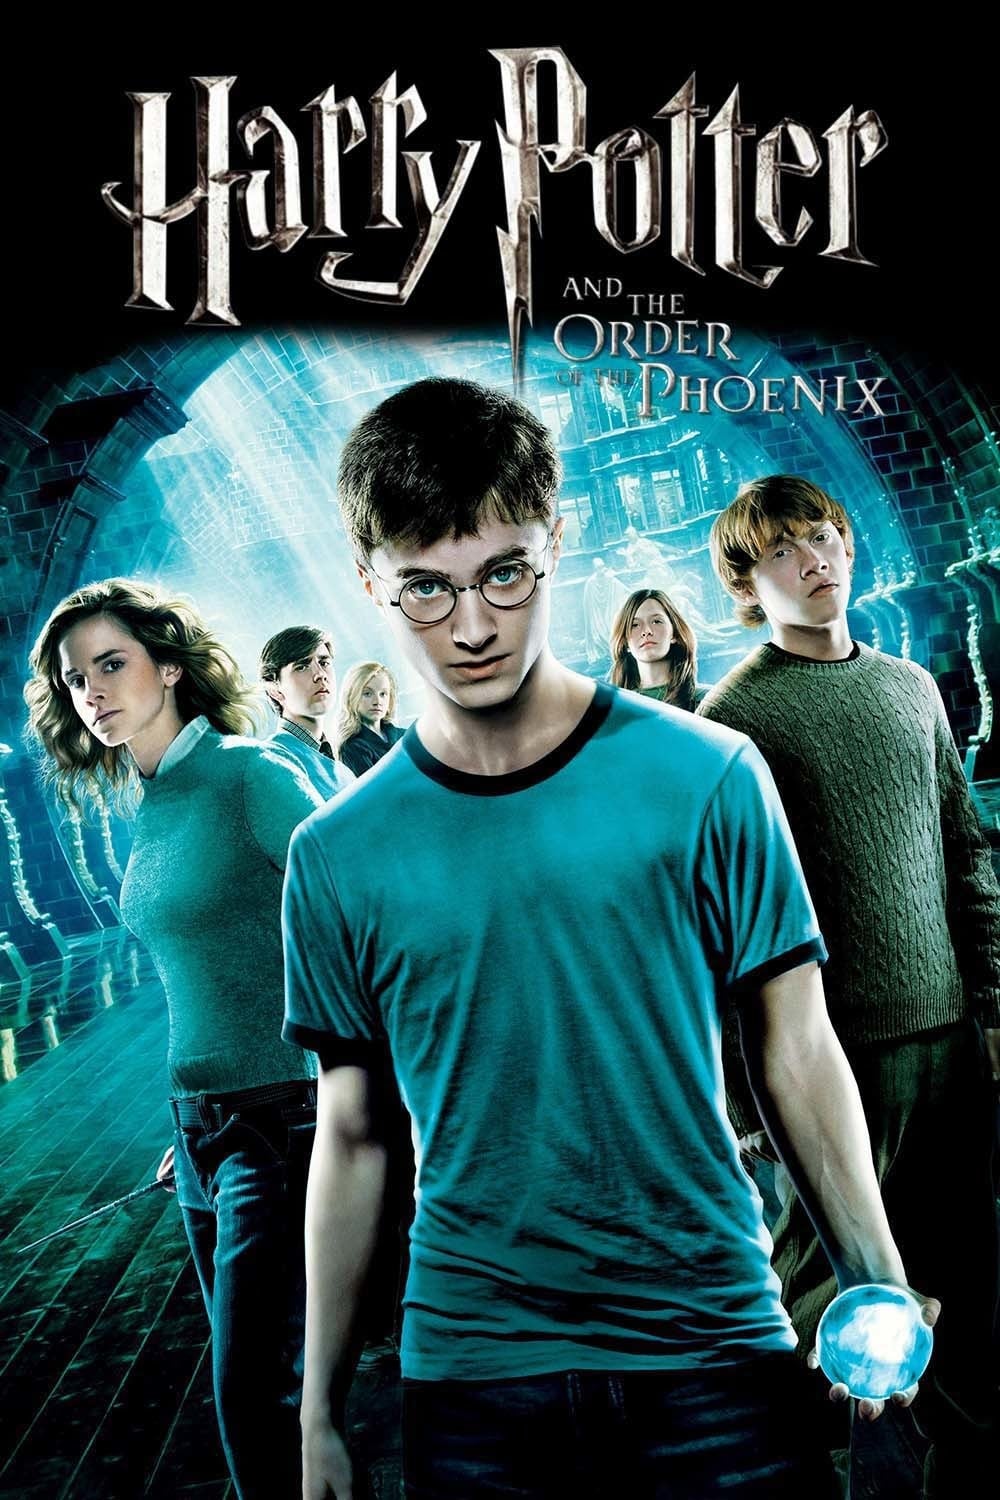 the movie harry potter and the order of the phoenix